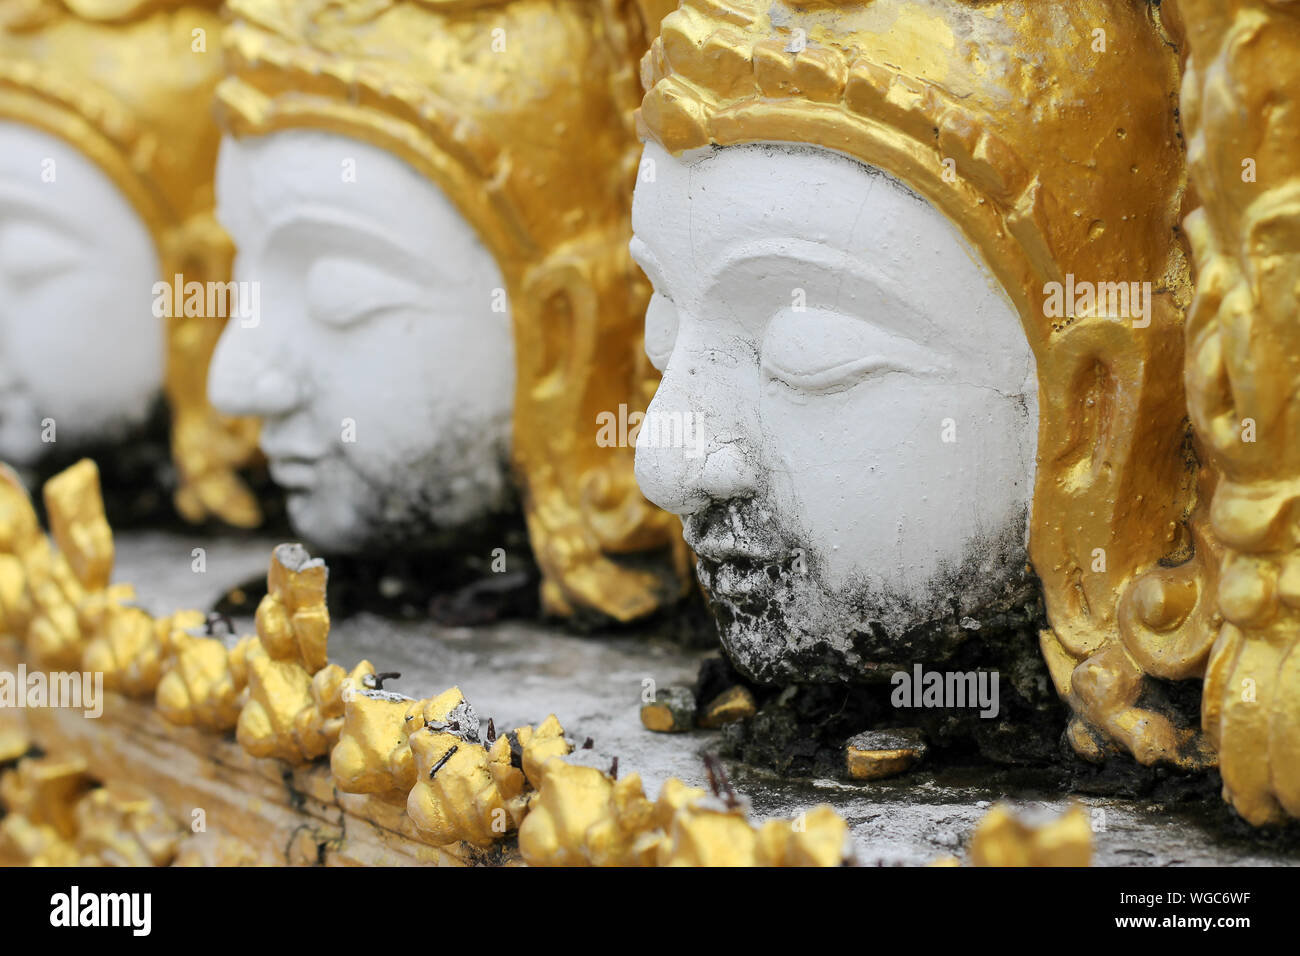 Stucco art in temples in Thailand Stock Photo